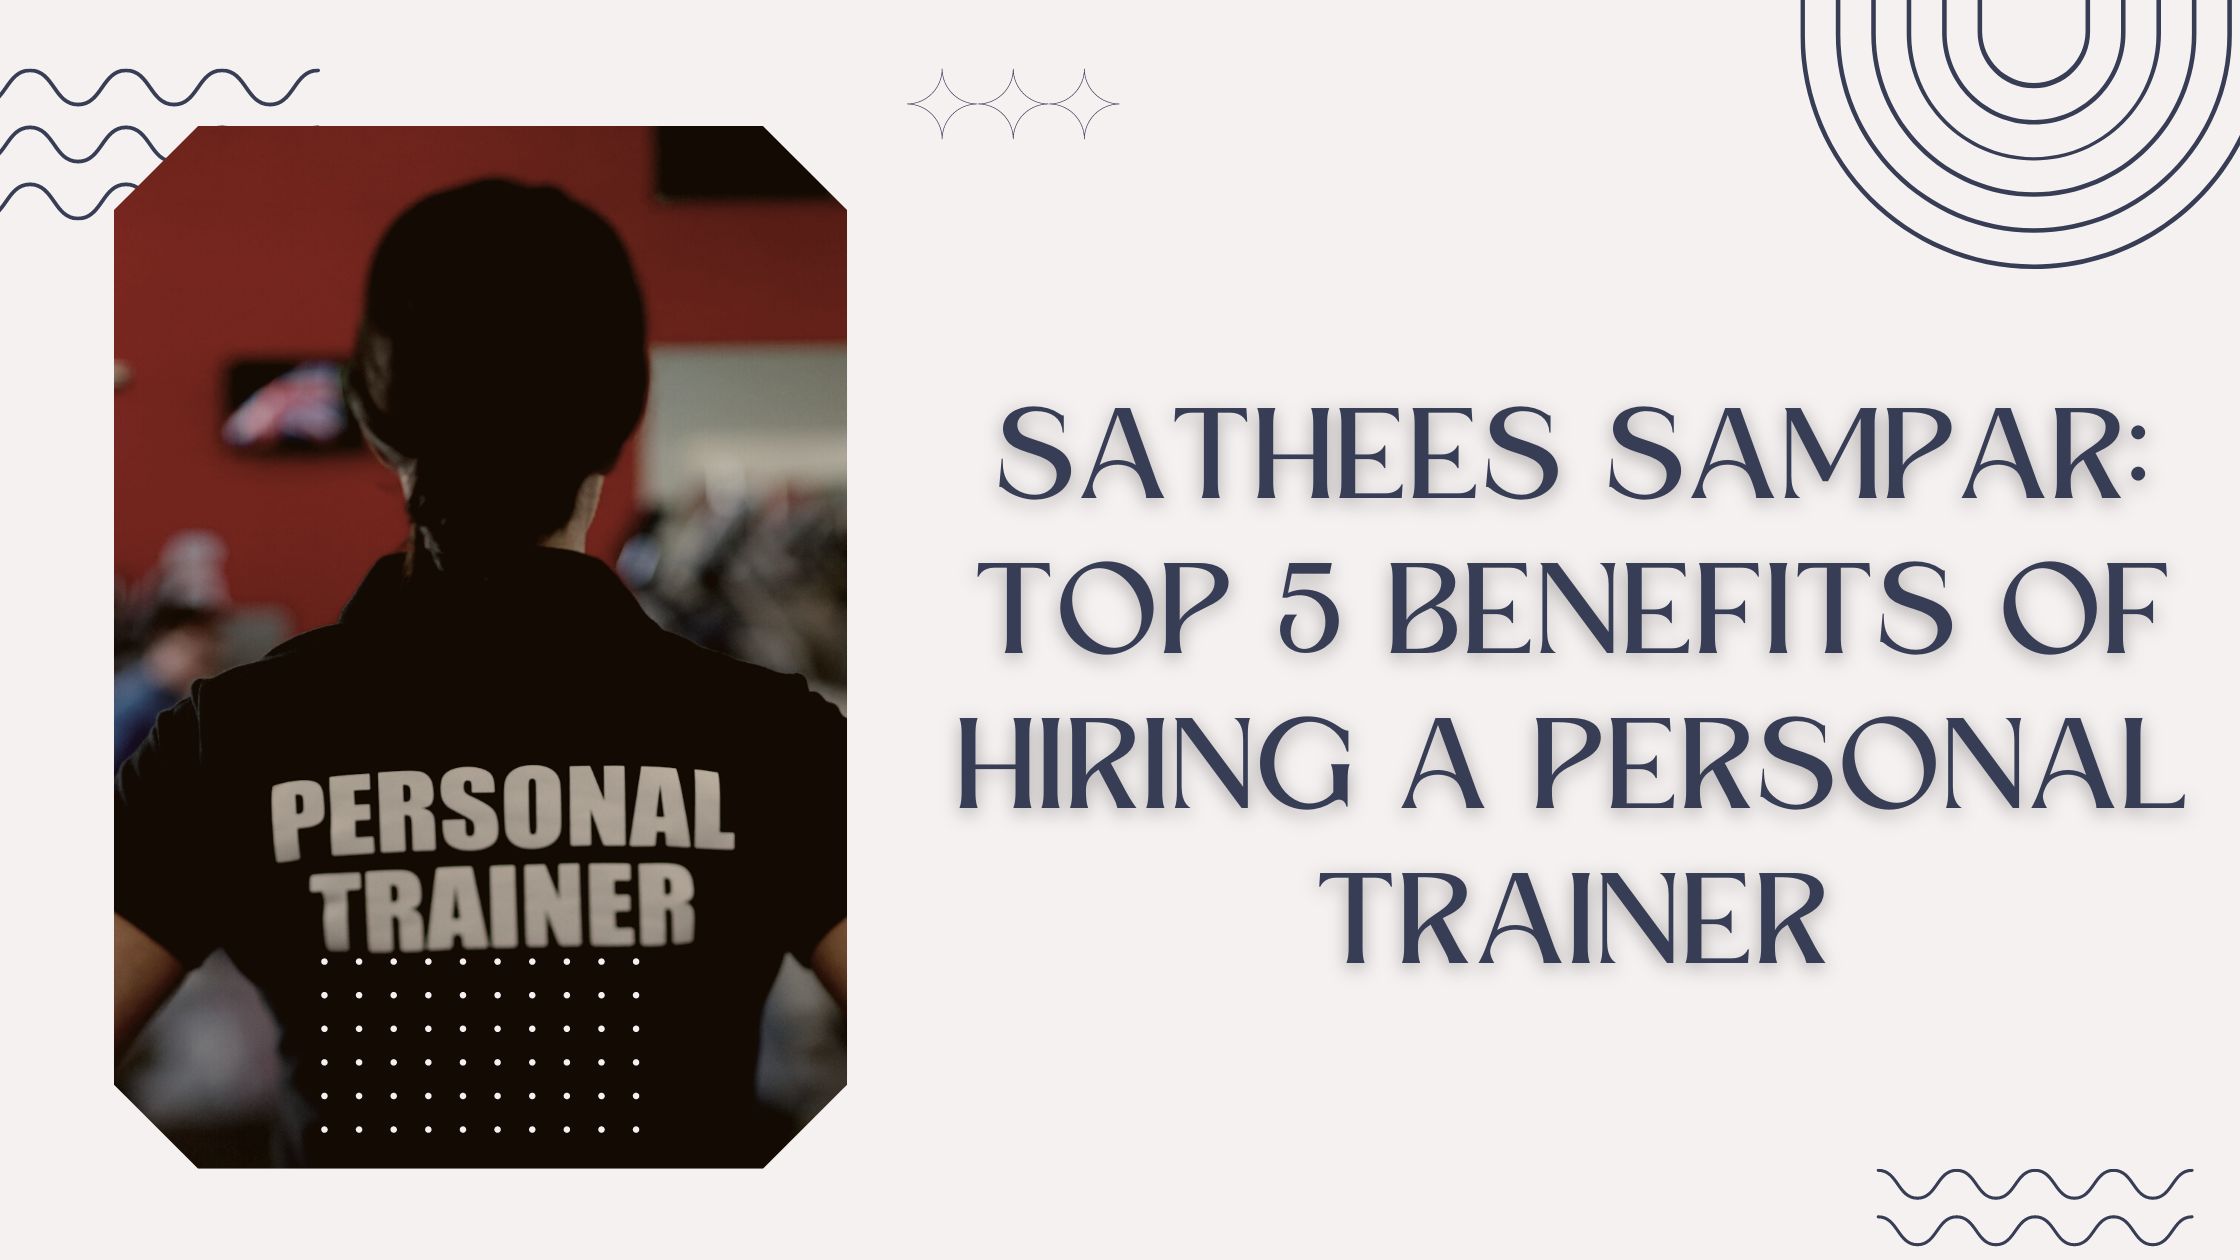 Sathees Sampar's Top 5 Benefits of Hiring a Personal Trainer